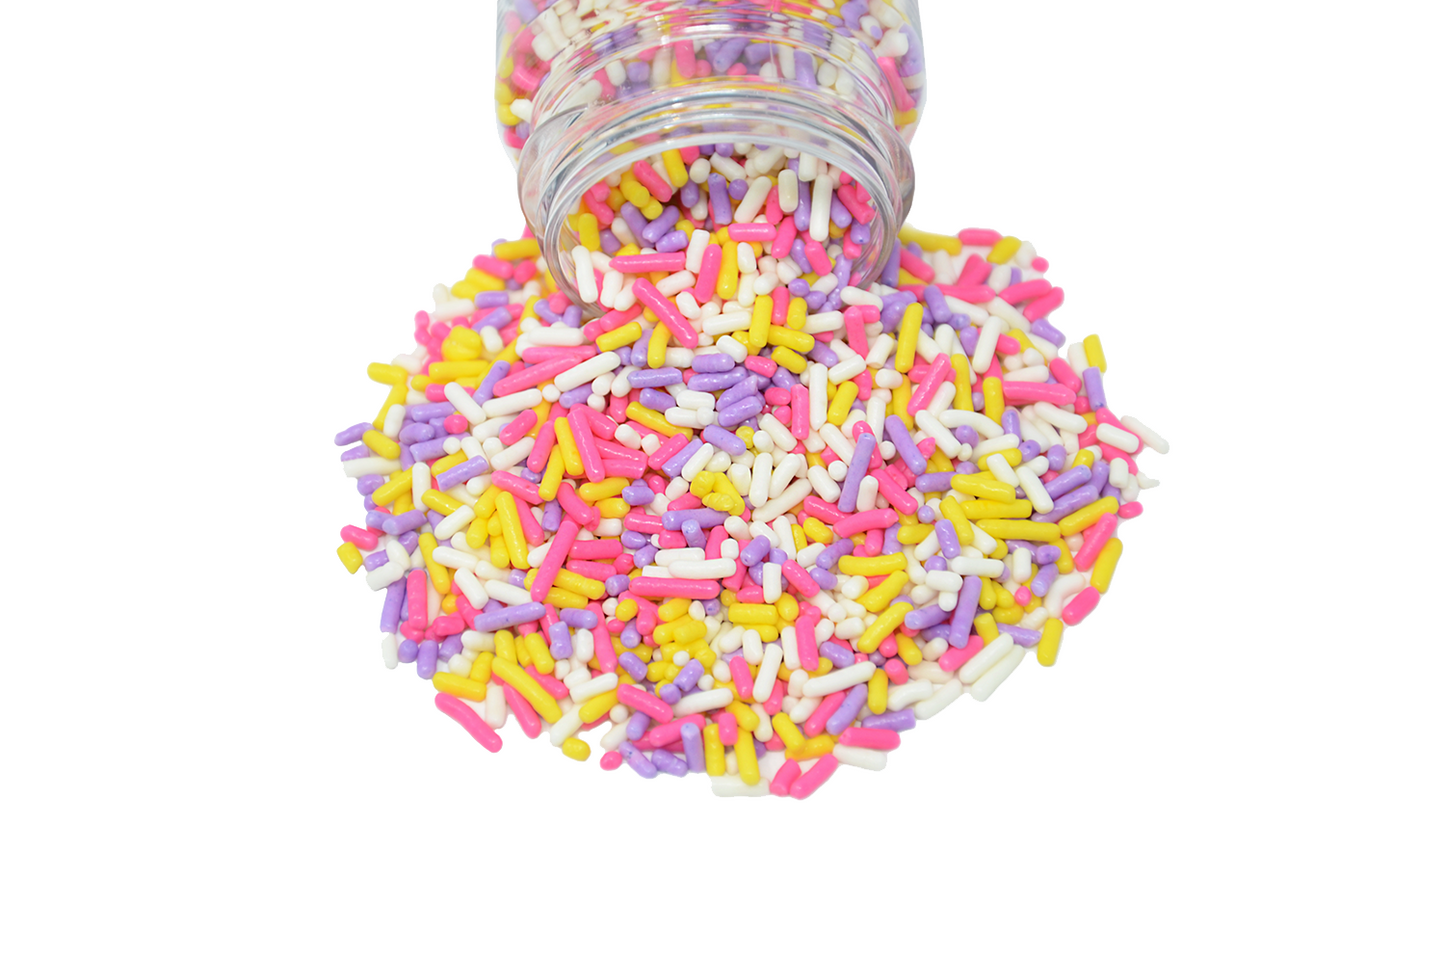 Spring Is In The Air Jimmies Sprinkle Mix 3oz Bottle